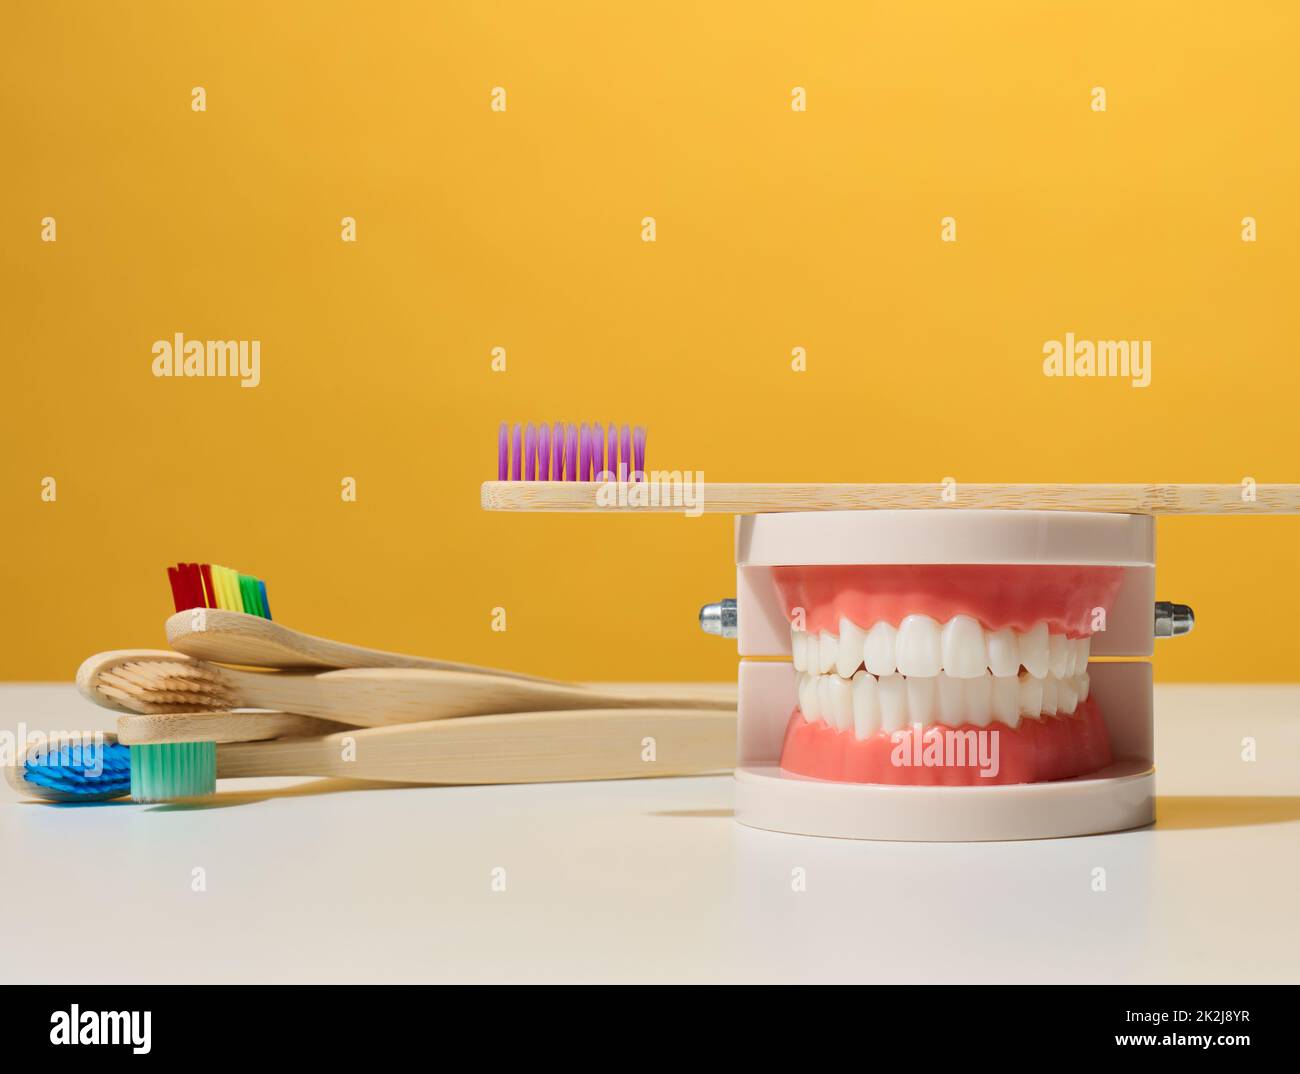 plastic model of a human jaw with white teeth and wooden toothbrush on a yellow background, oral hygiene Stock Photo